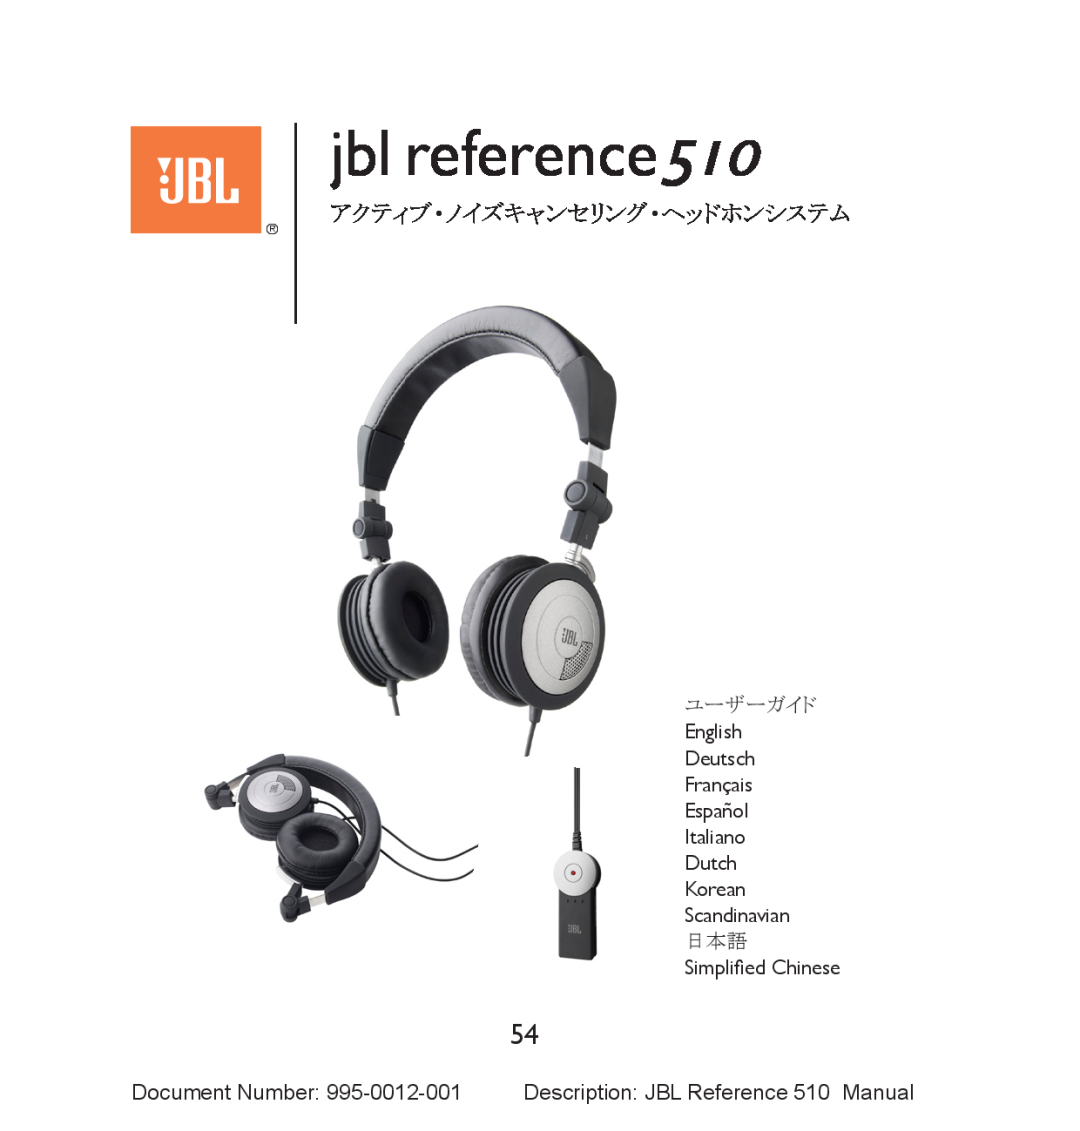 JBL manual jbl reference510, アクティブ・ノイズキャンセリング・ヘッドホンシステム, Simplified Chinese 